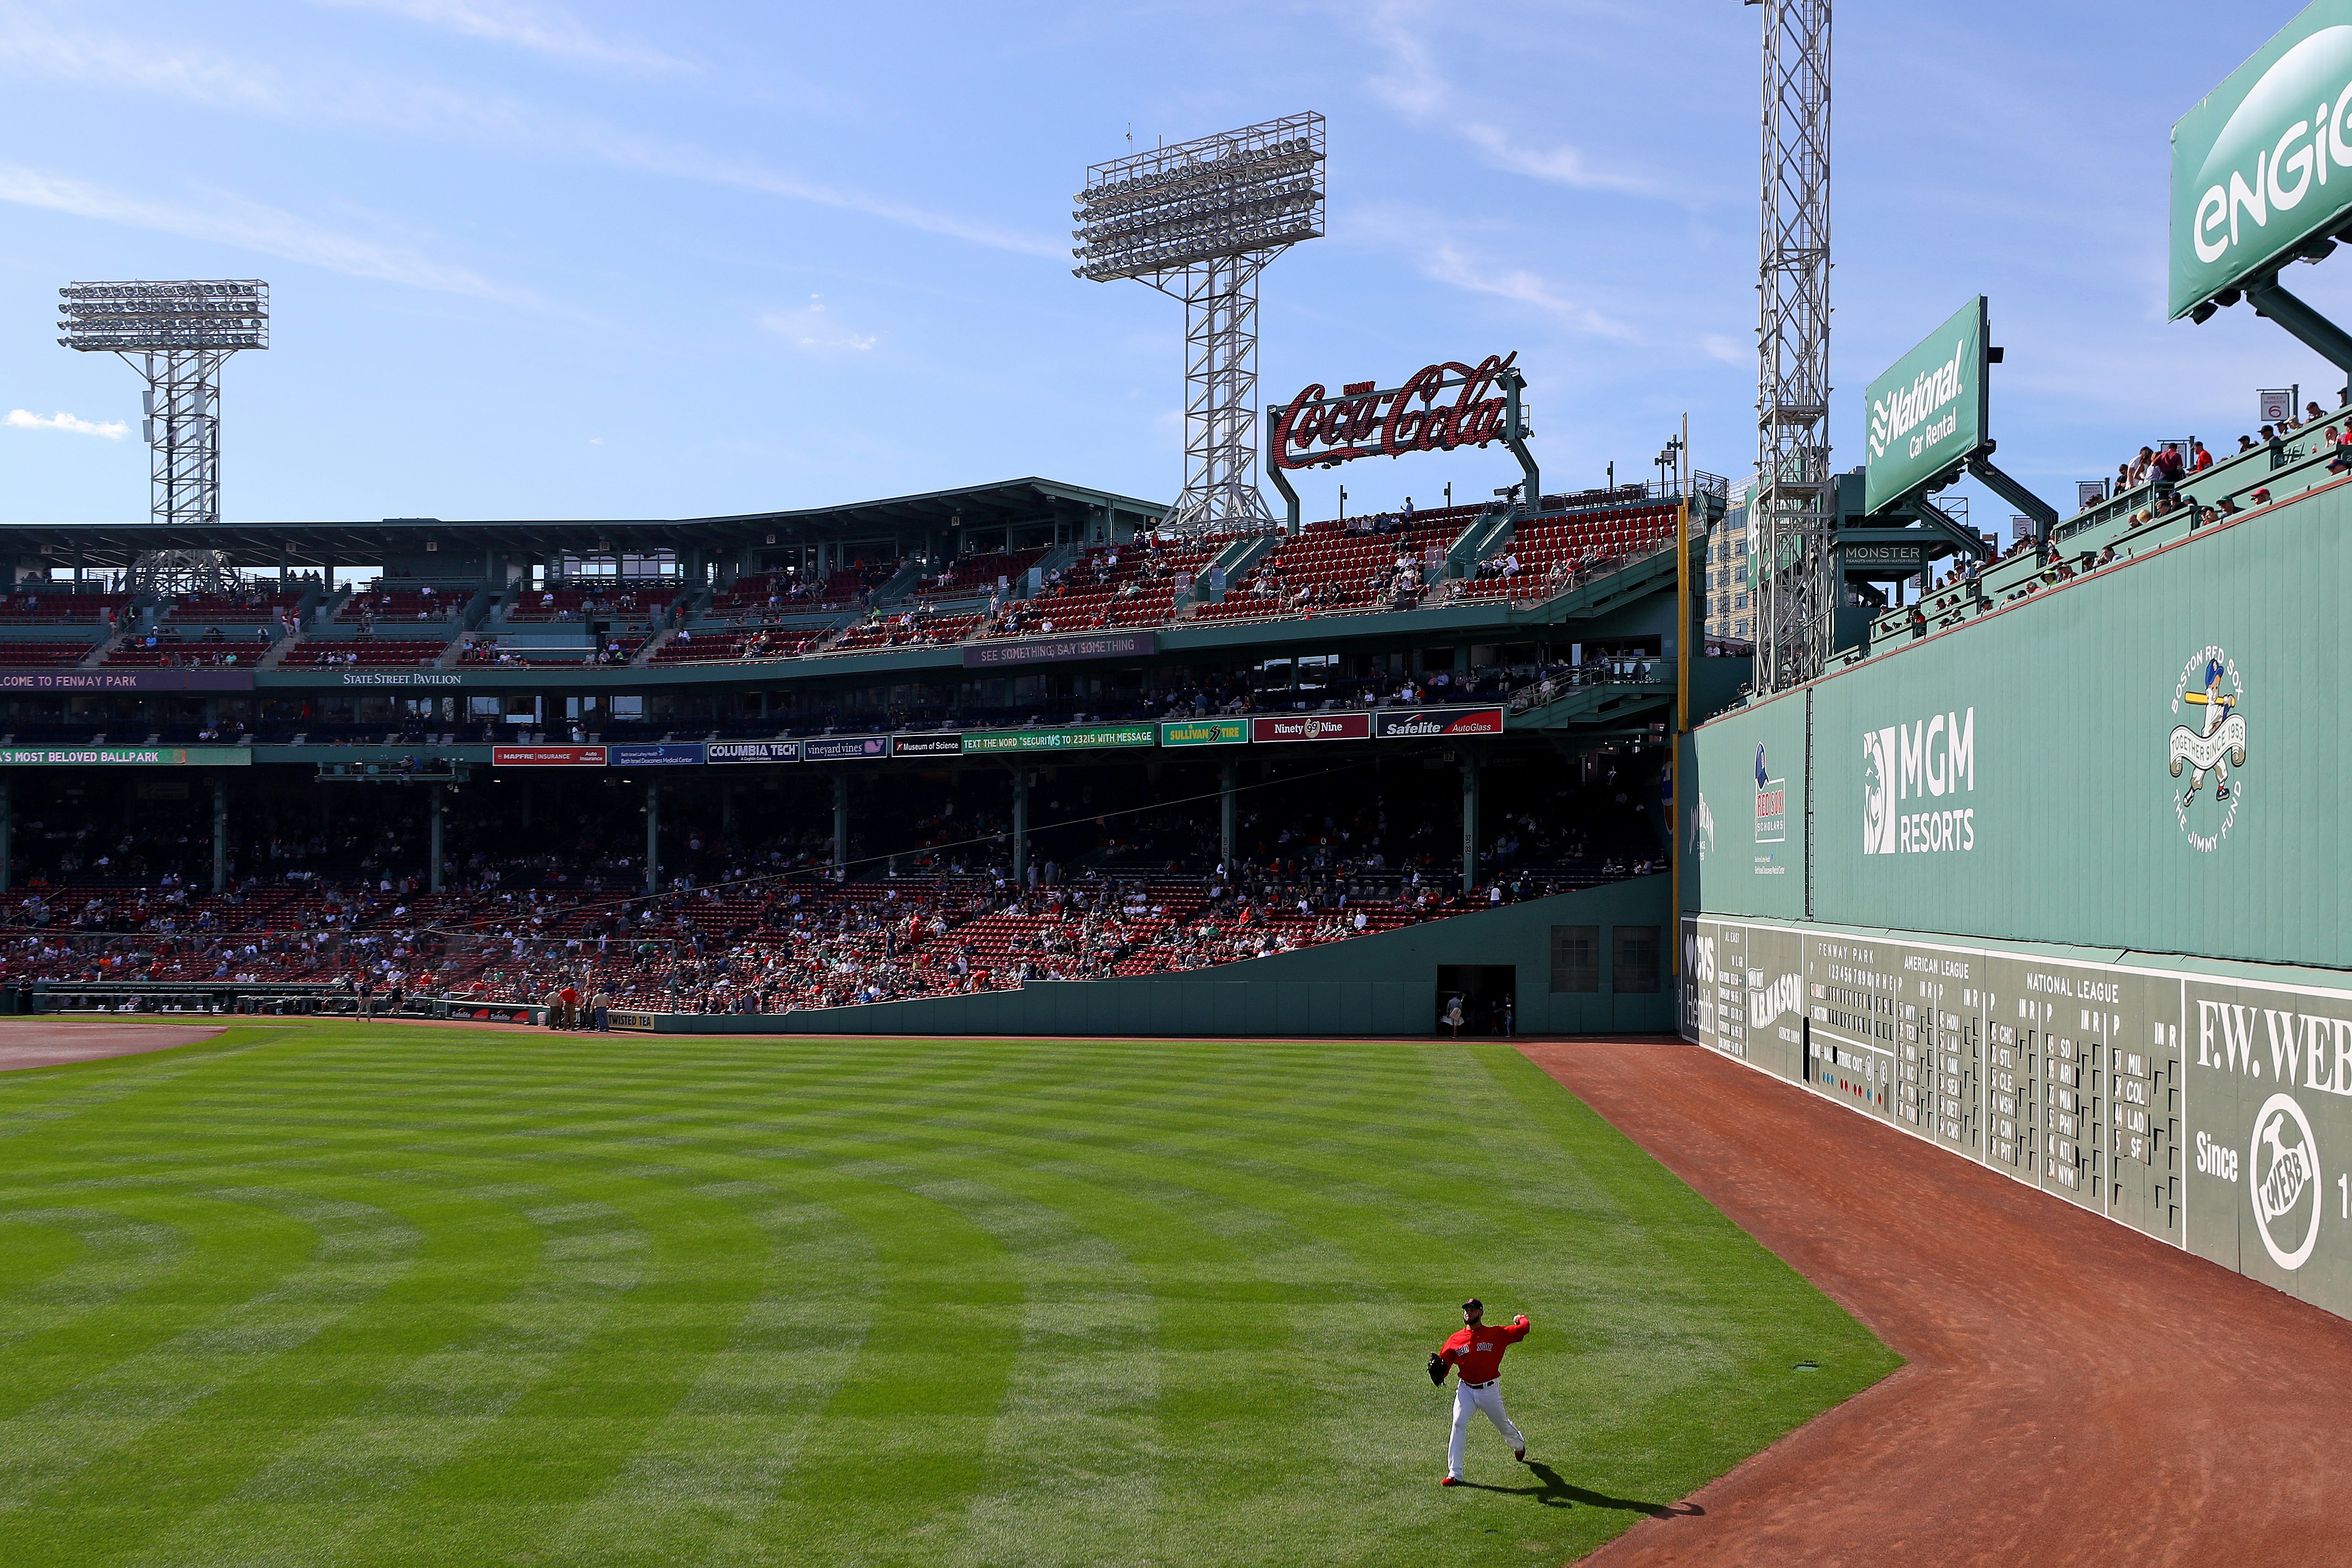 A baseball player fields a ball next to the large wall called the Green Monster in Fenway Park, Boston